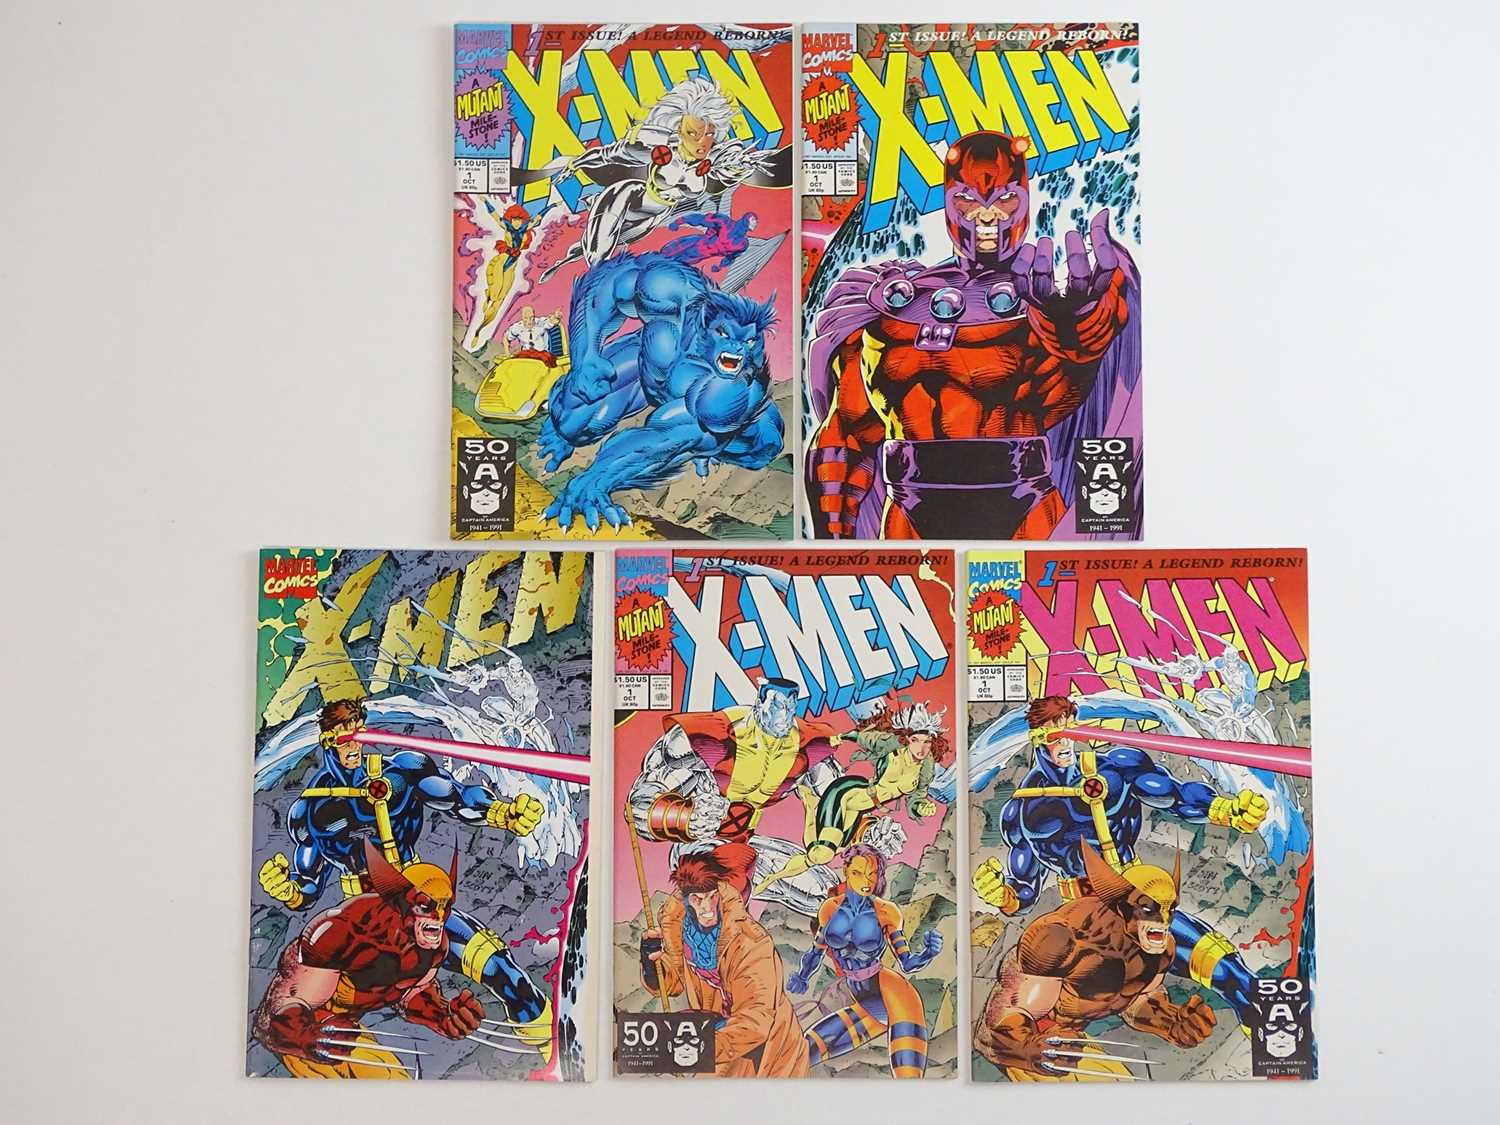 X-MEN #1 - (5 in Lot) - (1991 - MARVEL) - Complete set of ALL five variant covers - Jim Lee